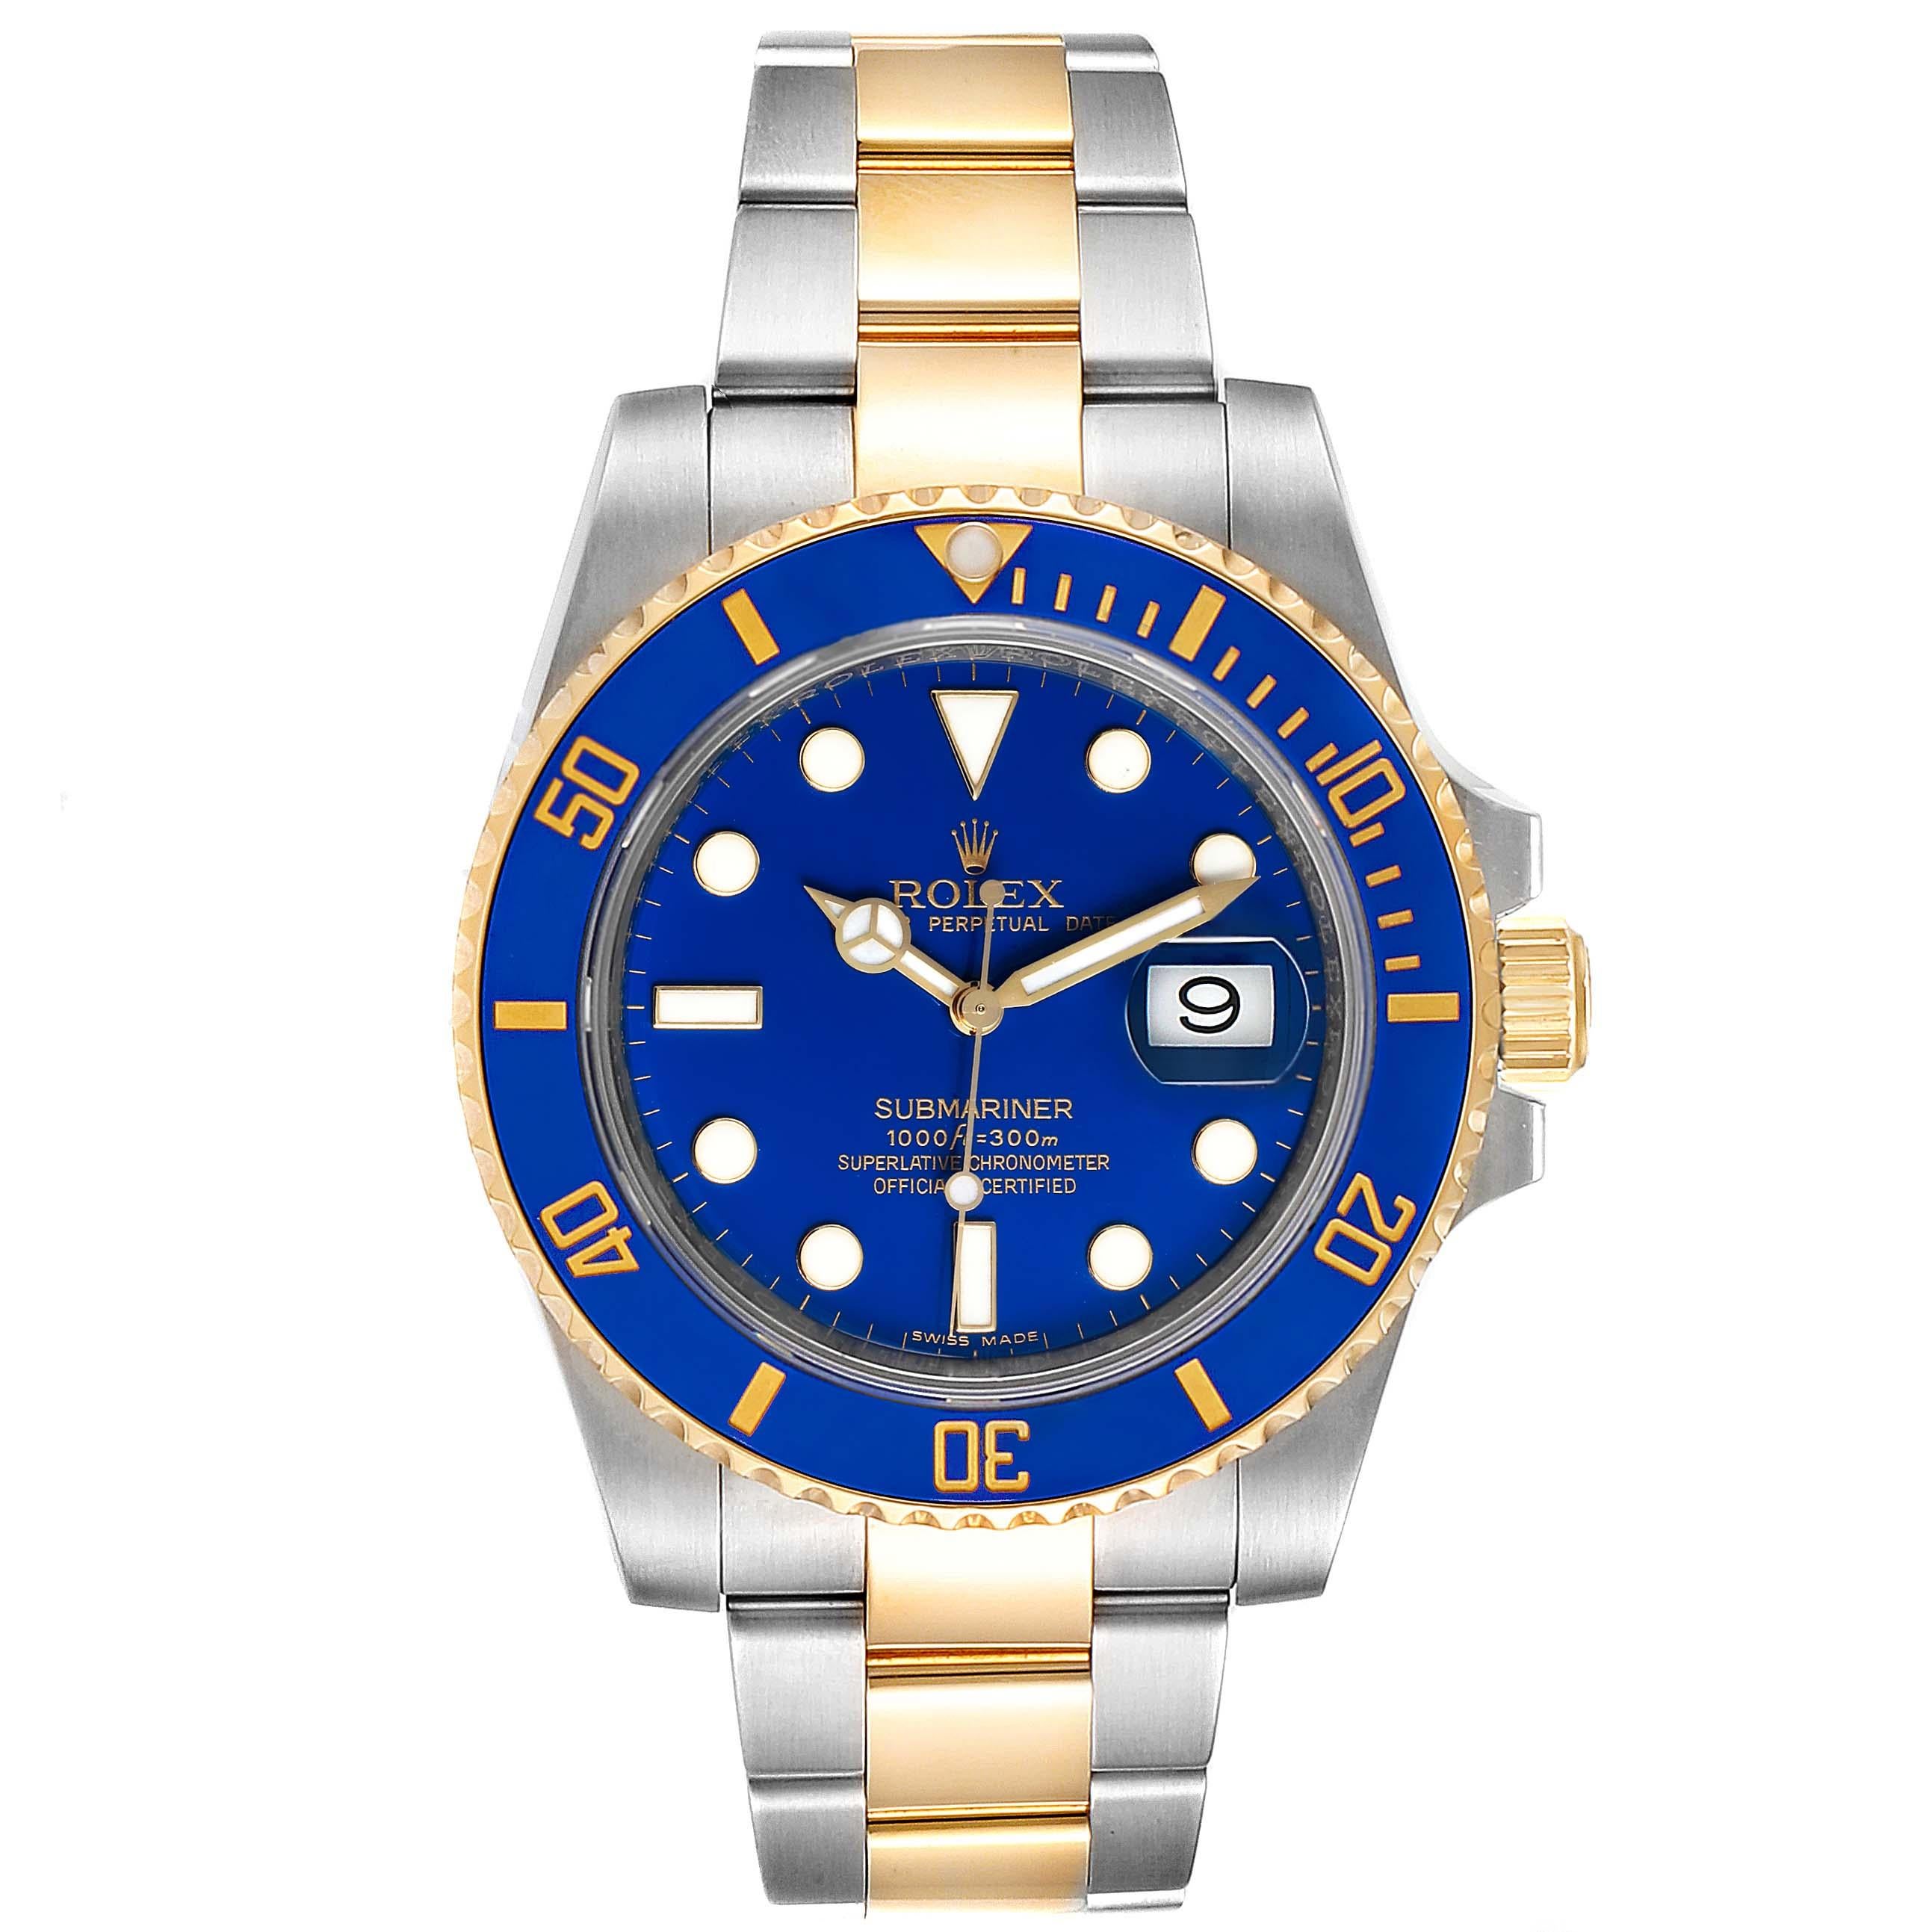 Rolex Submariner Steel 18K Yellow Gold Blue Dial Mens Watch 116613. Officially certified chronometer self-winding movement. Stainless steel and 18k yellow gold case 40.0 mm in diameter. Rolex logo on a crown. Ceramic blue Ion-plated special